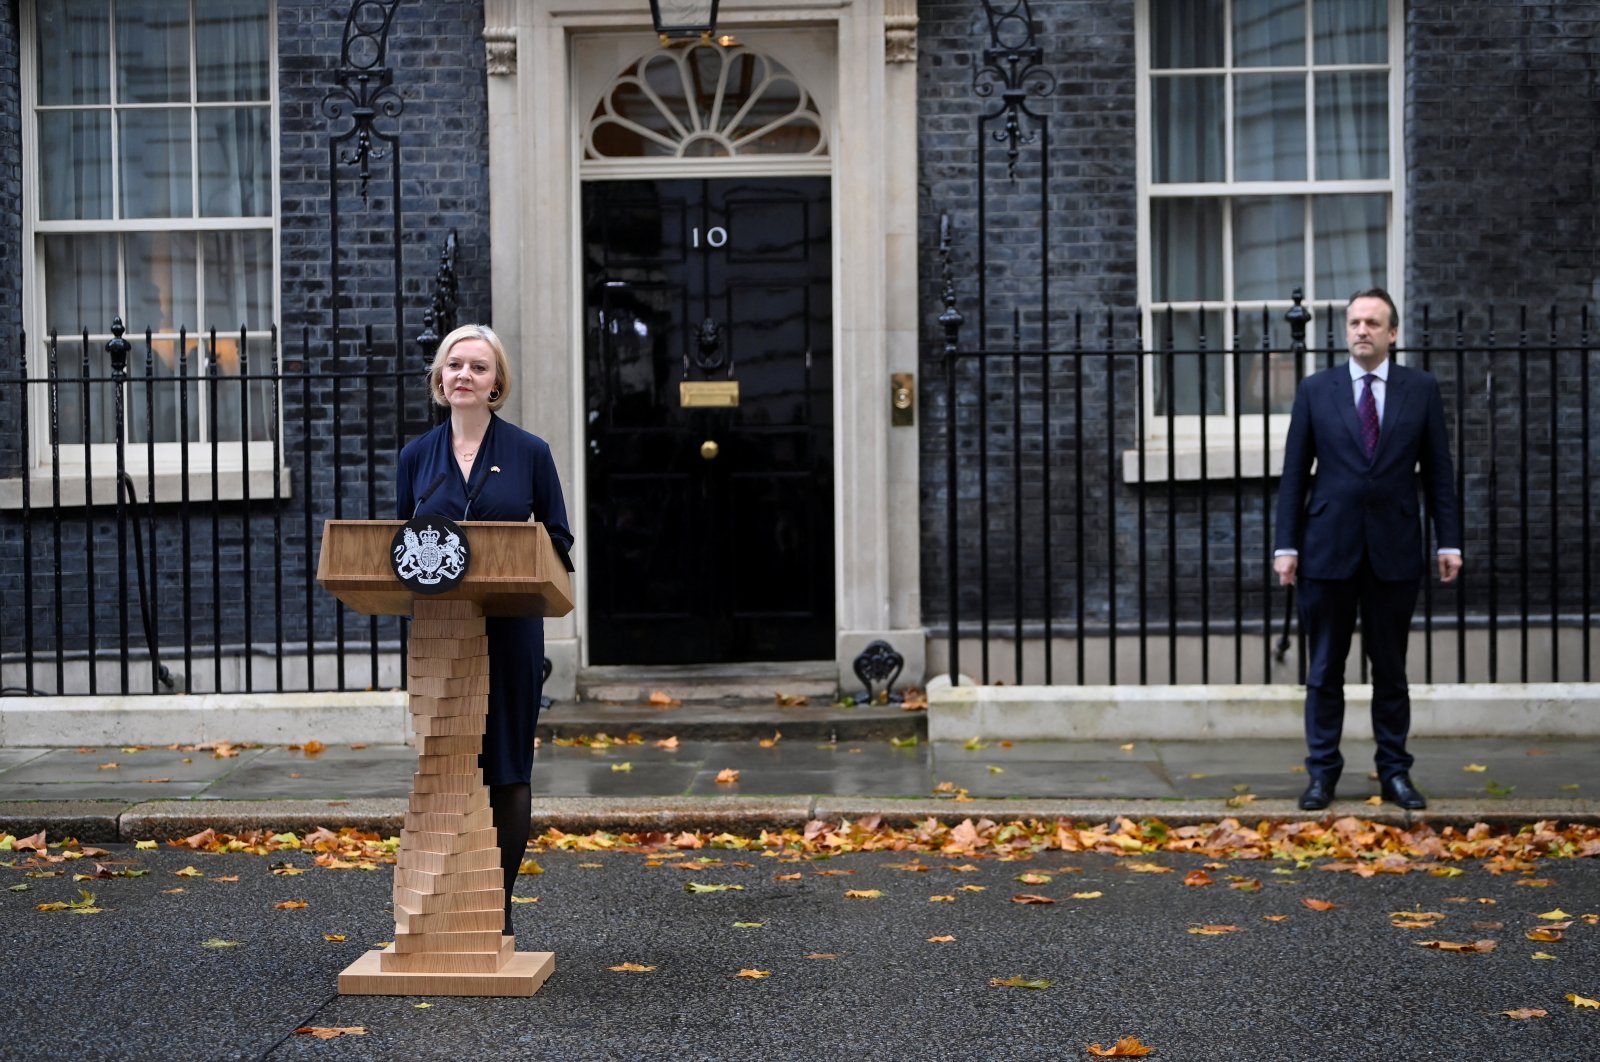 British Prime Minister Liz Truss gives statement outside Number 10 Downing Street, London, Britain October 20, 2022. REUTERS/Toby Melville